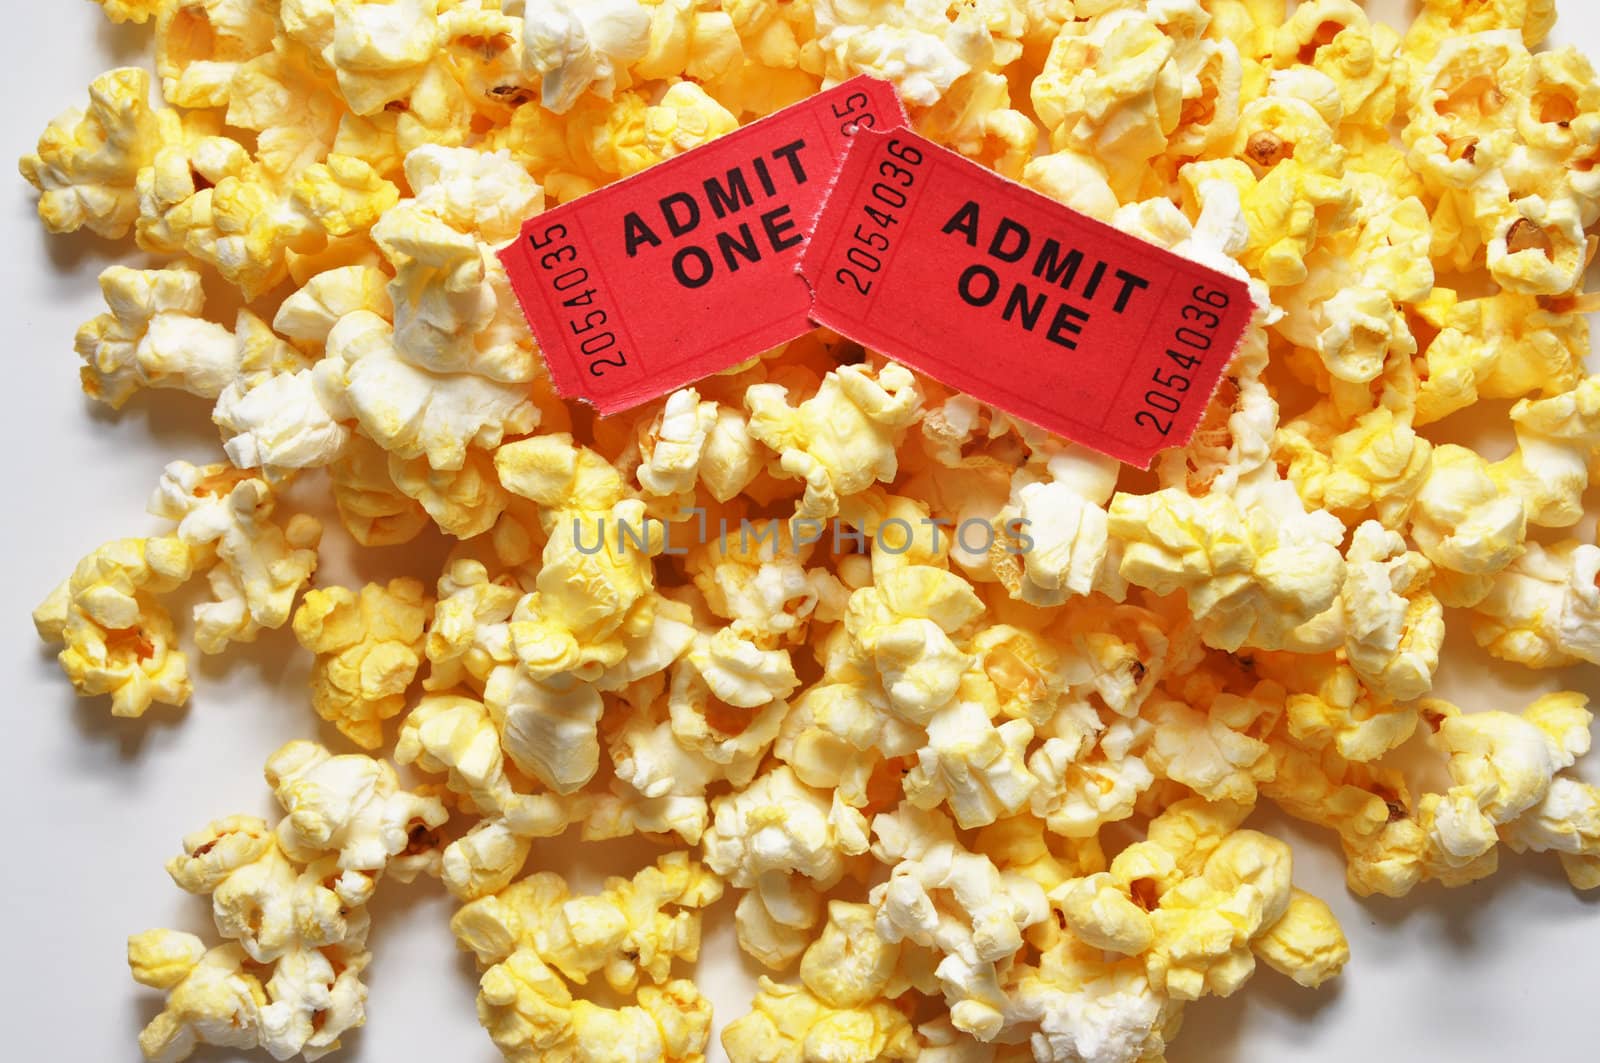 Movie Tickets and Popcorn by dehooks